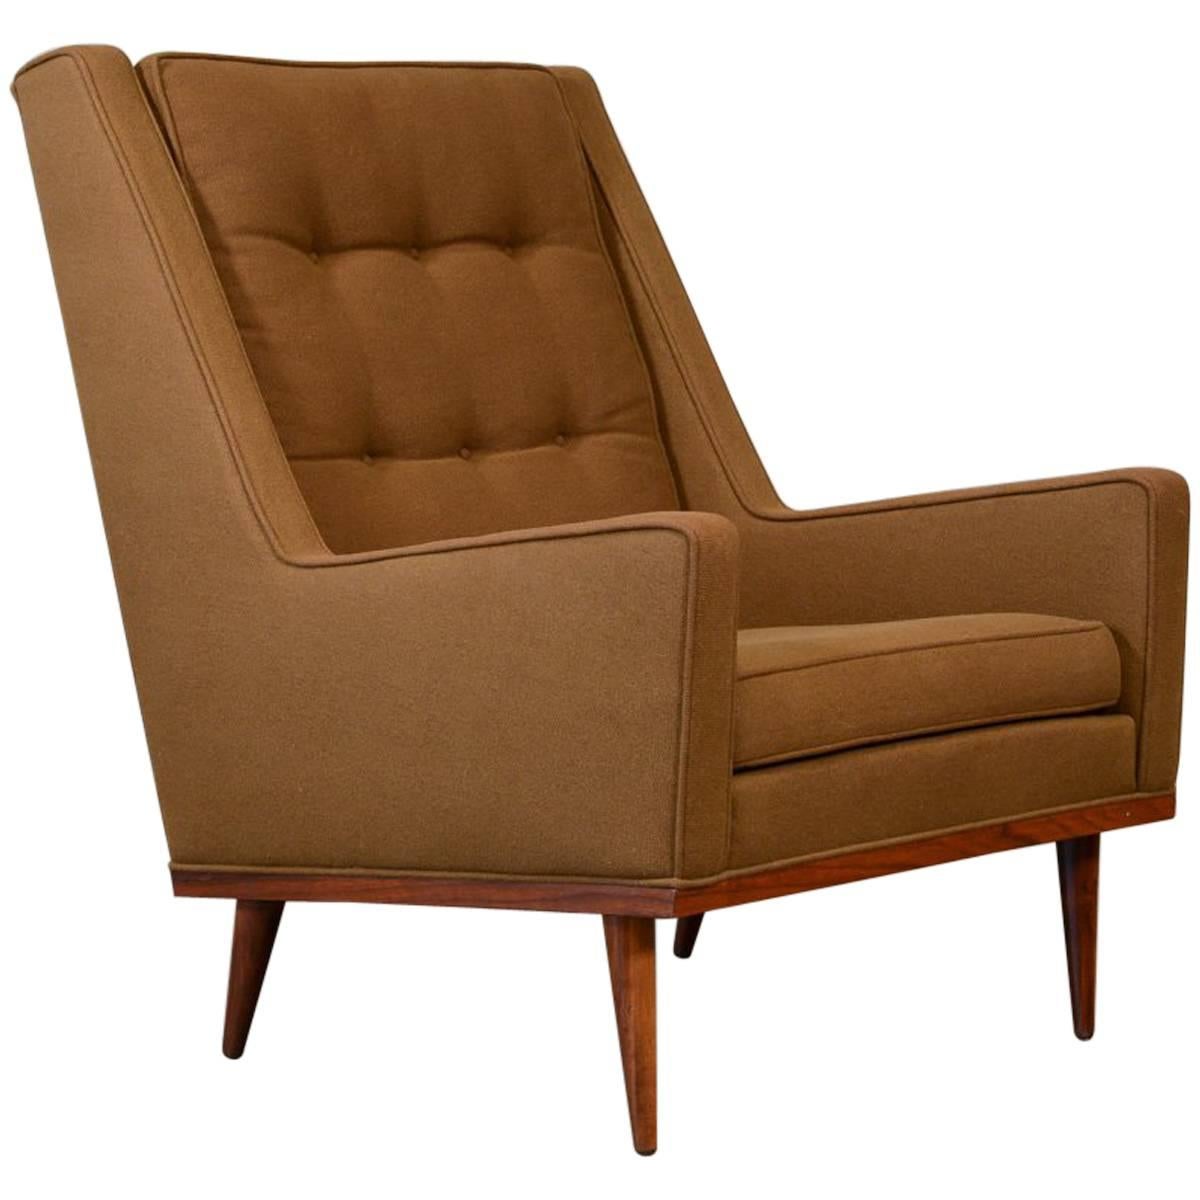 Milo Baughman 'Articulate Seating' Lounge Chair For Sale